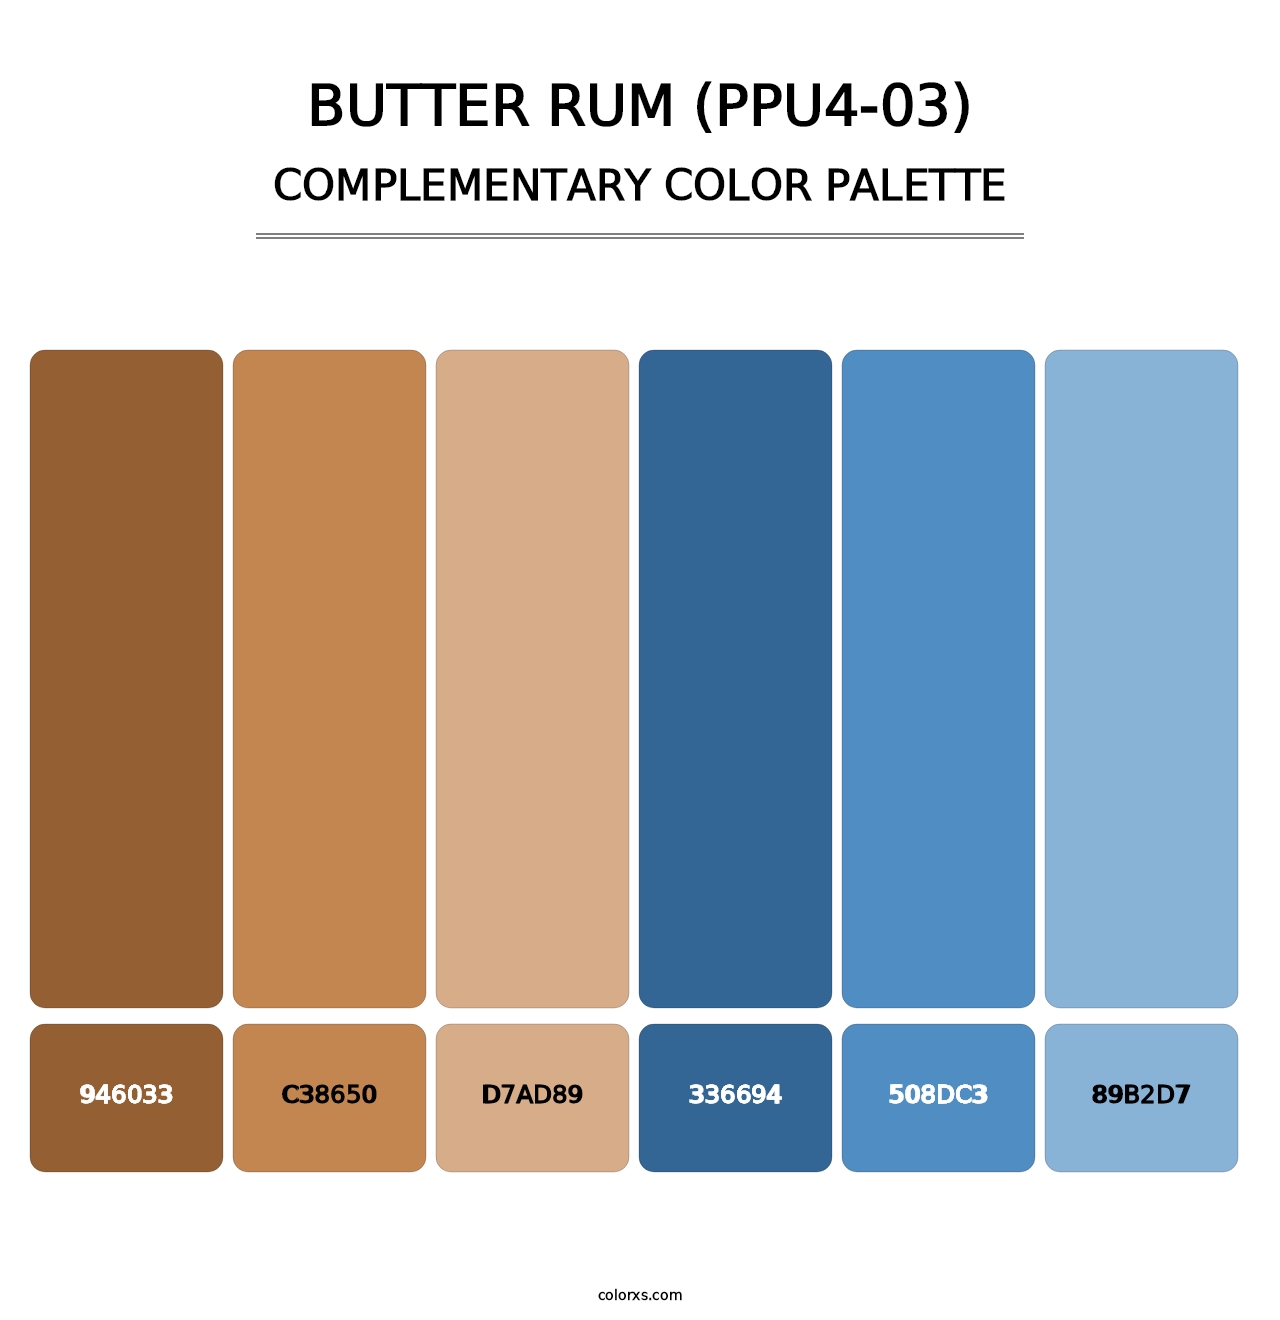 Butter Rum (PPU4-03) - Complementary Color Palette